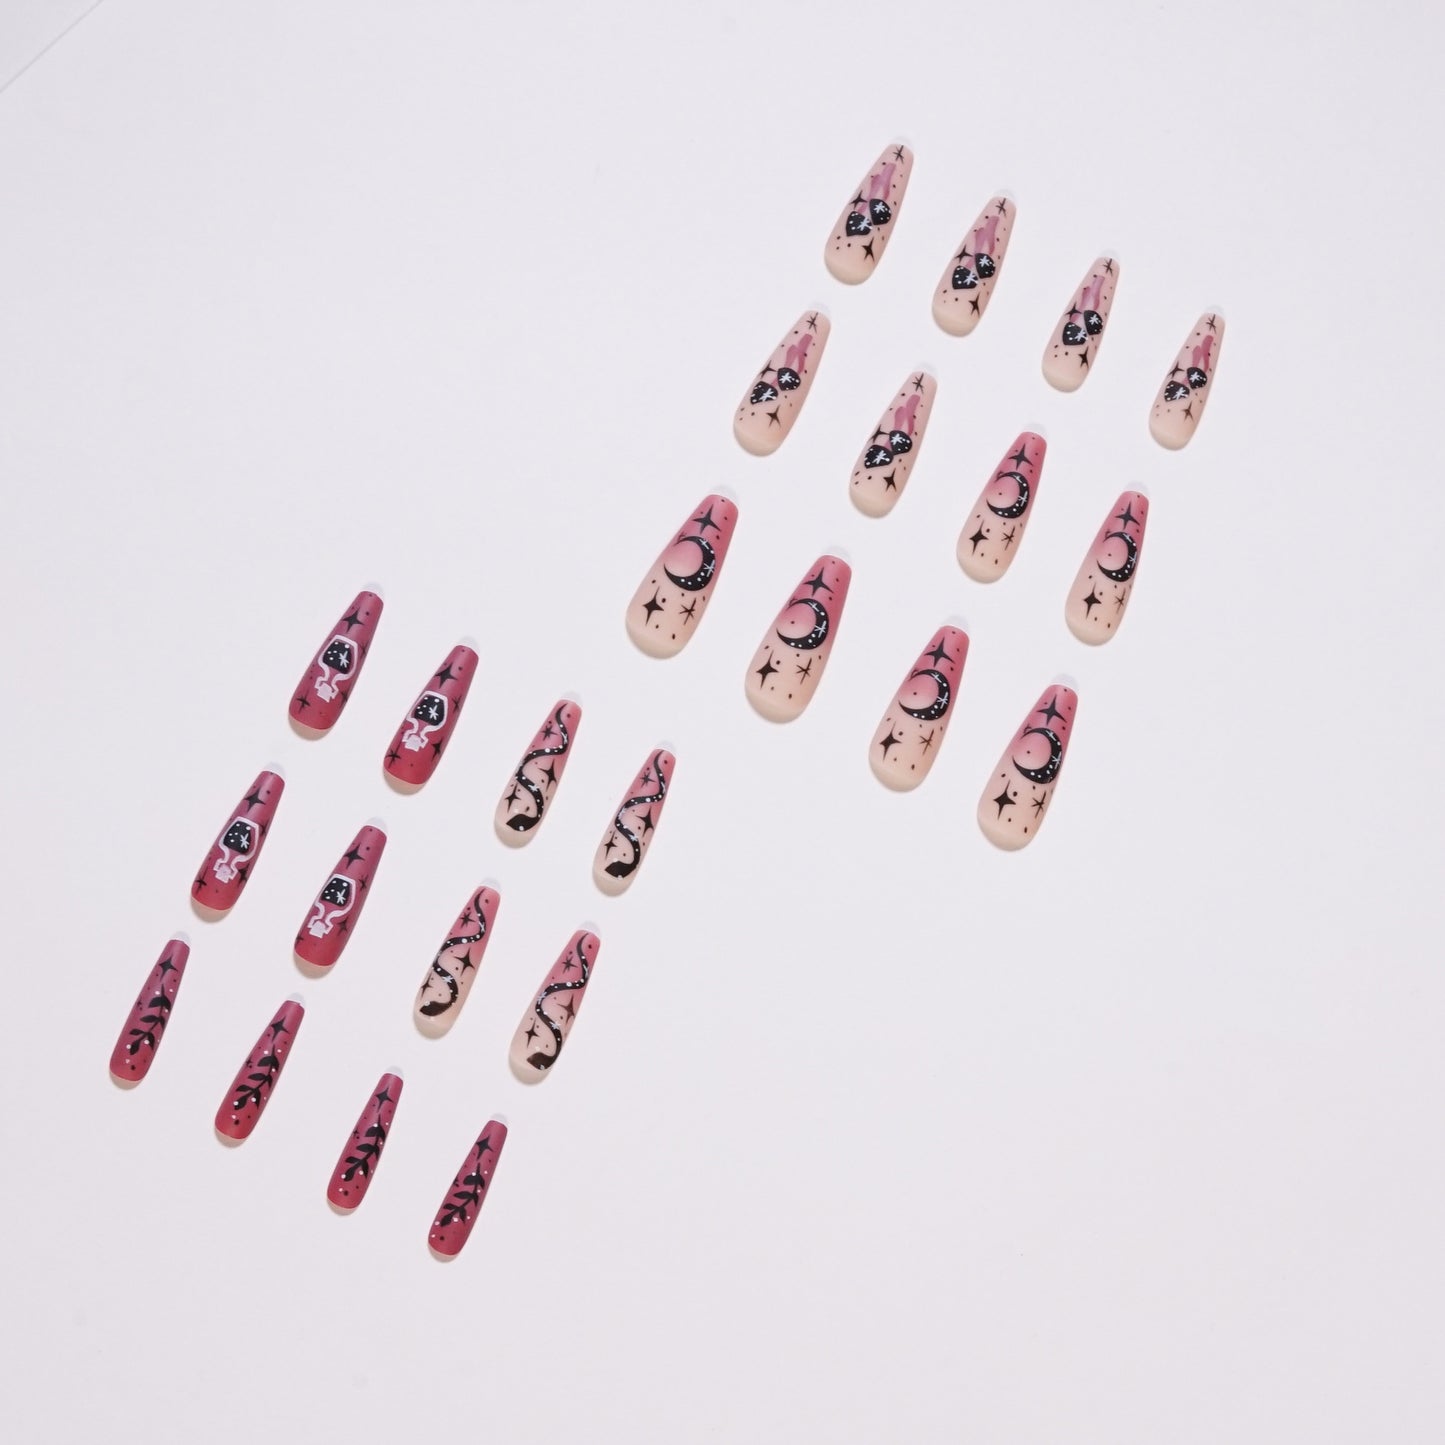 Universe Mystery Coffin Long Fake Nails Colorful Sky Press ons Flase Nails Press On Nails Tips Salon